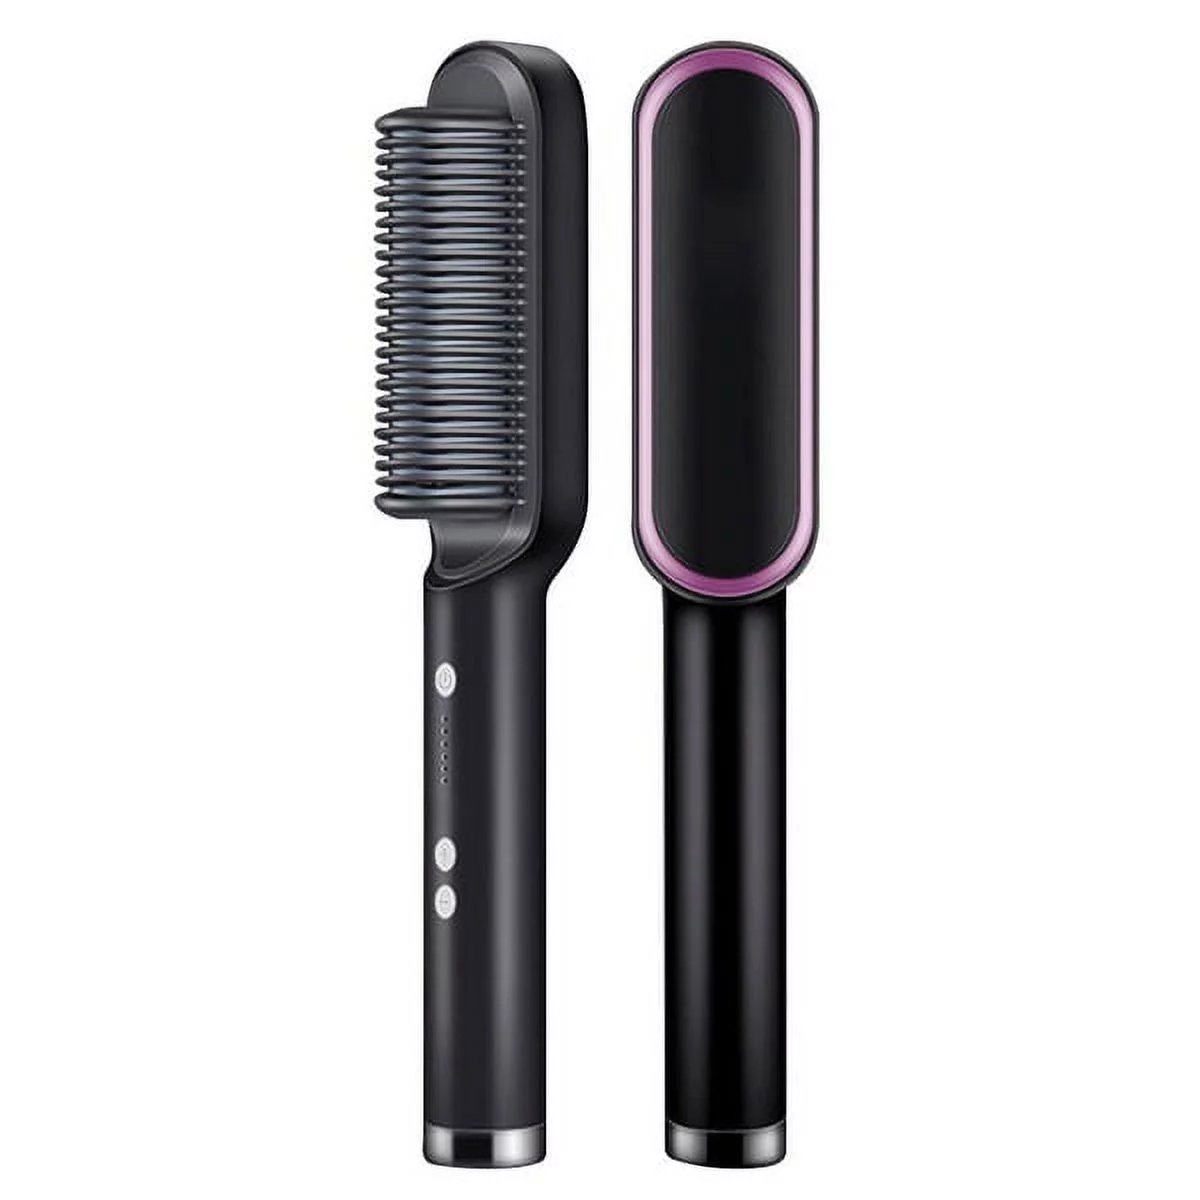 💖LAST DAY 49% OFF💖 2 in 1 Negative Ion Hair Straightener Styling Comb